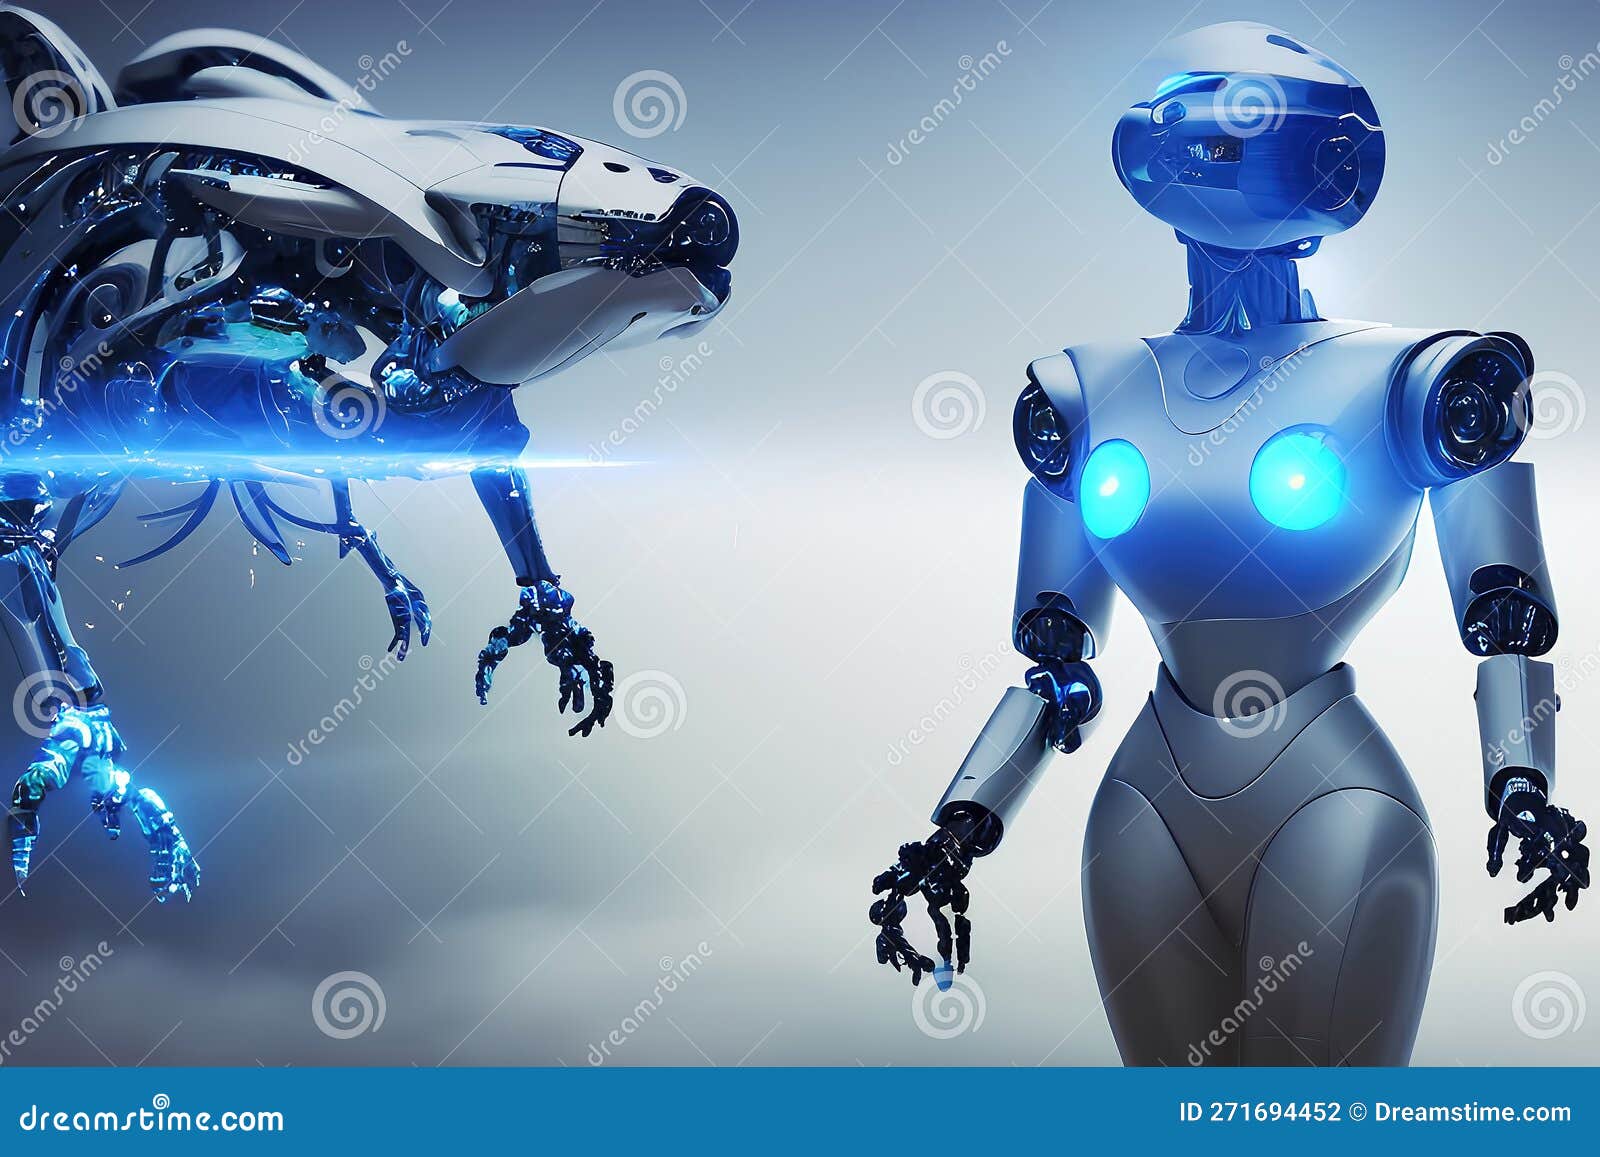 futuristic robots, technology background with technological cybernetics devices and robotics